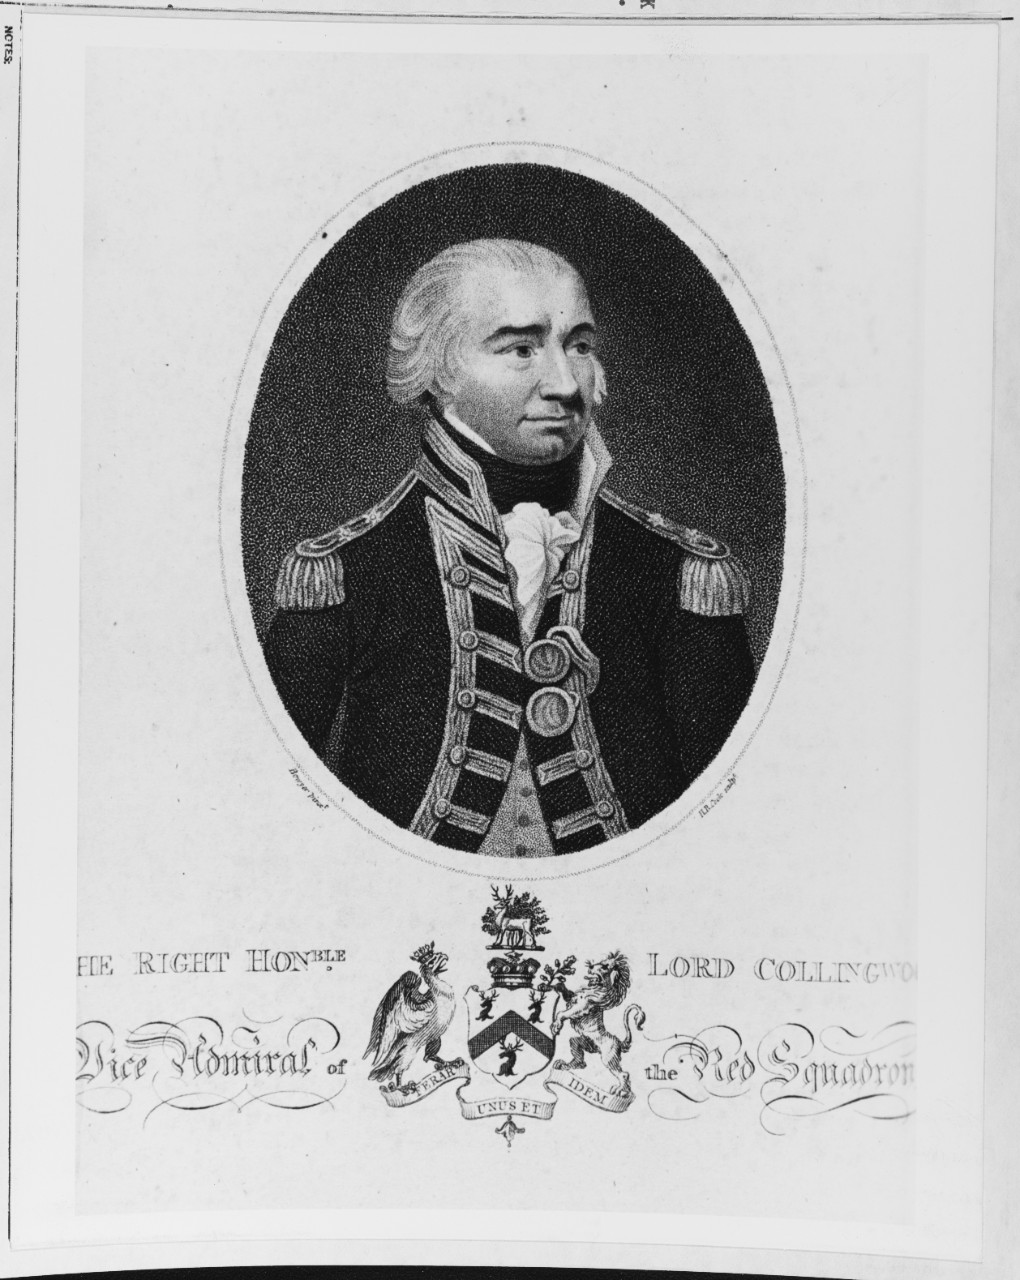 Cuthbert Collingwood Lord Collingwood (1750-1810), British Vice- Admiral